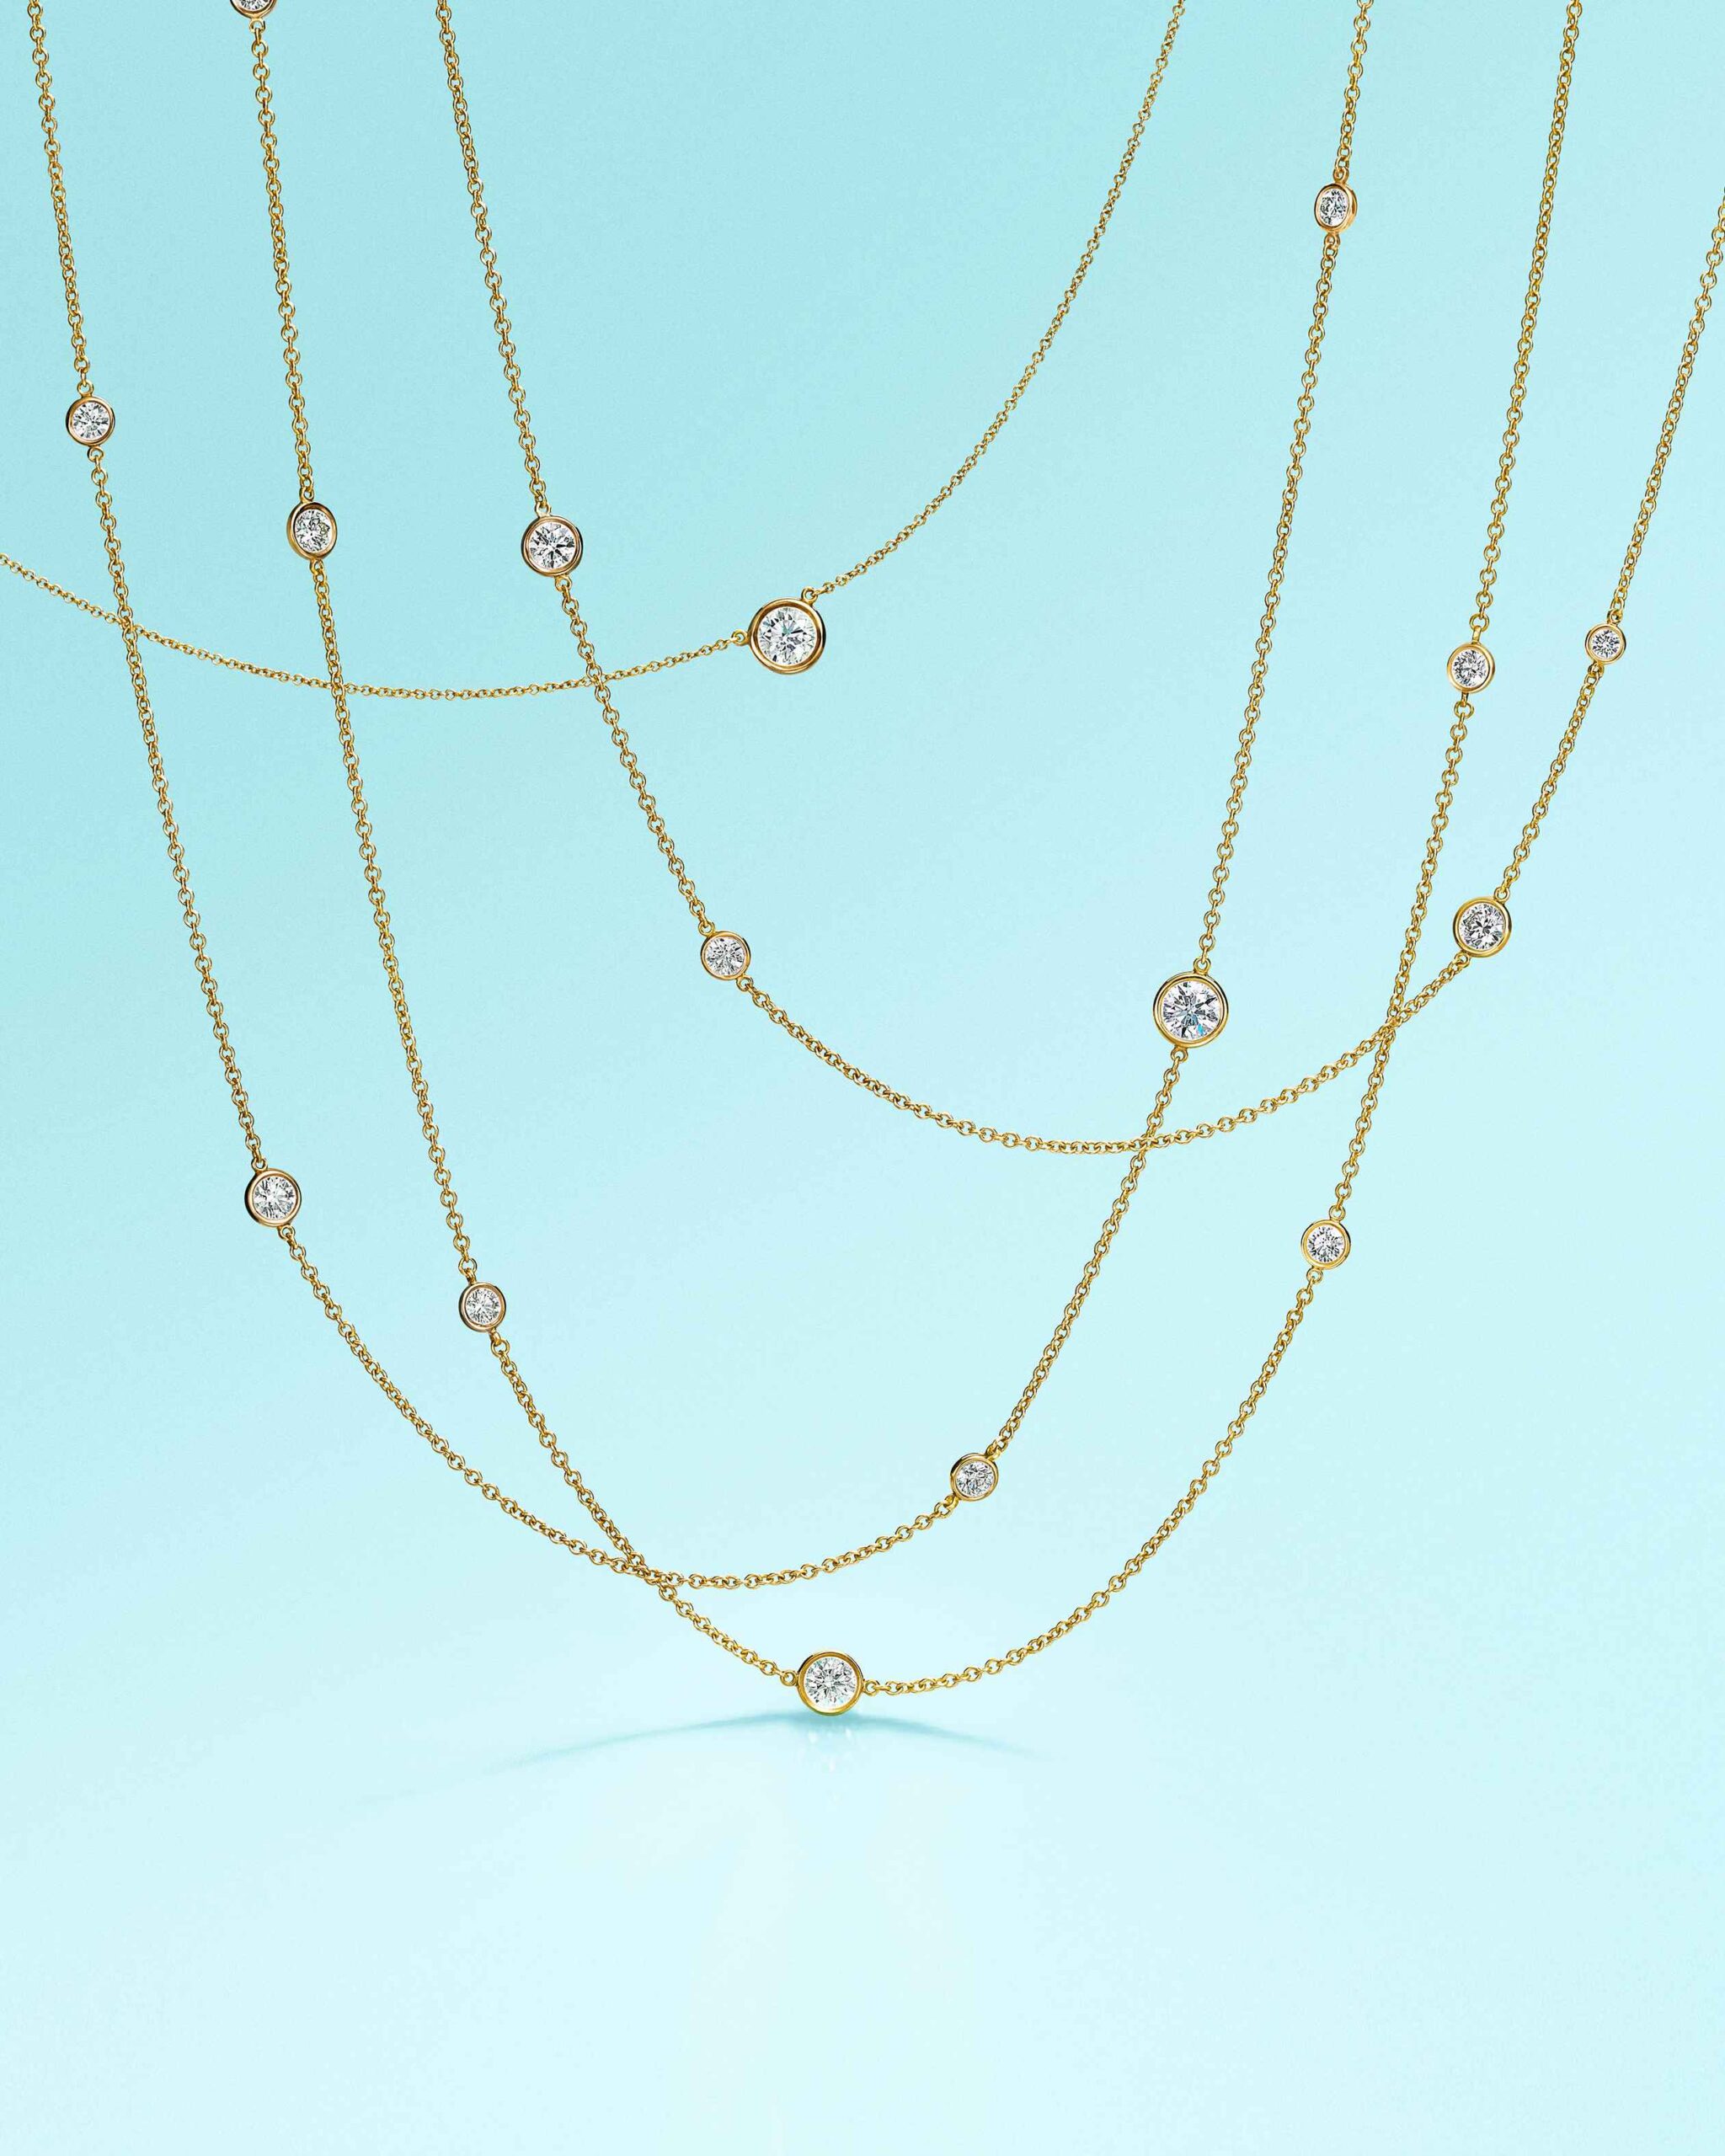 Fall in Love With This Tiffany & Co. Wishlist For Valentine’s Day